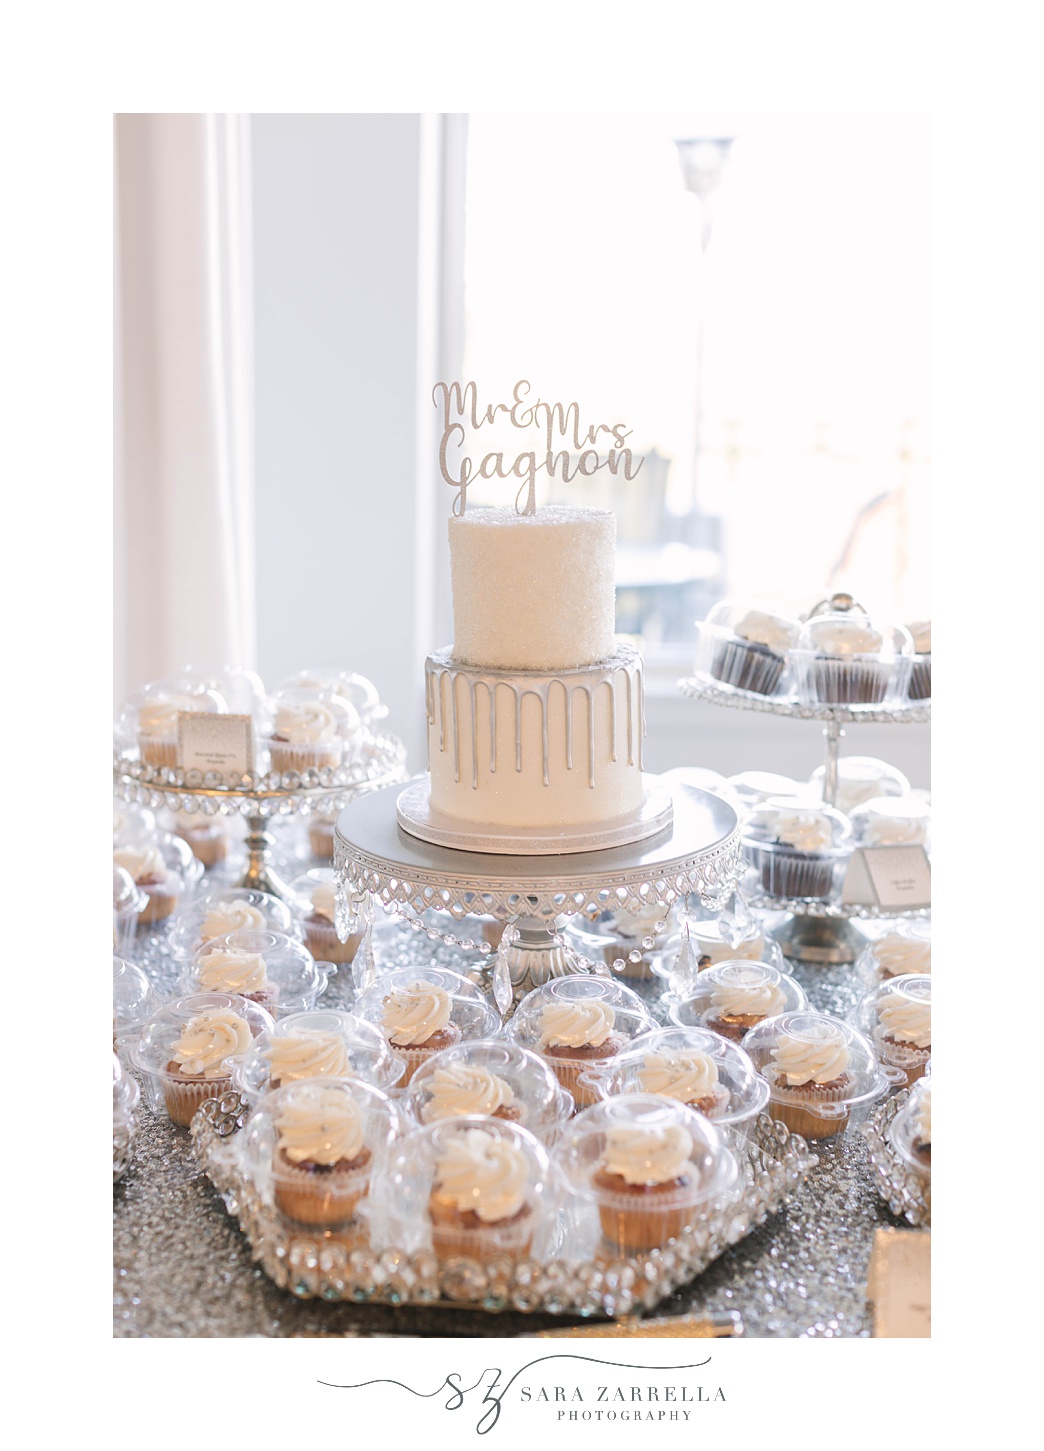 wedding cake and cupcakes for Intimate Kirkbrae Country Club Wedding reception